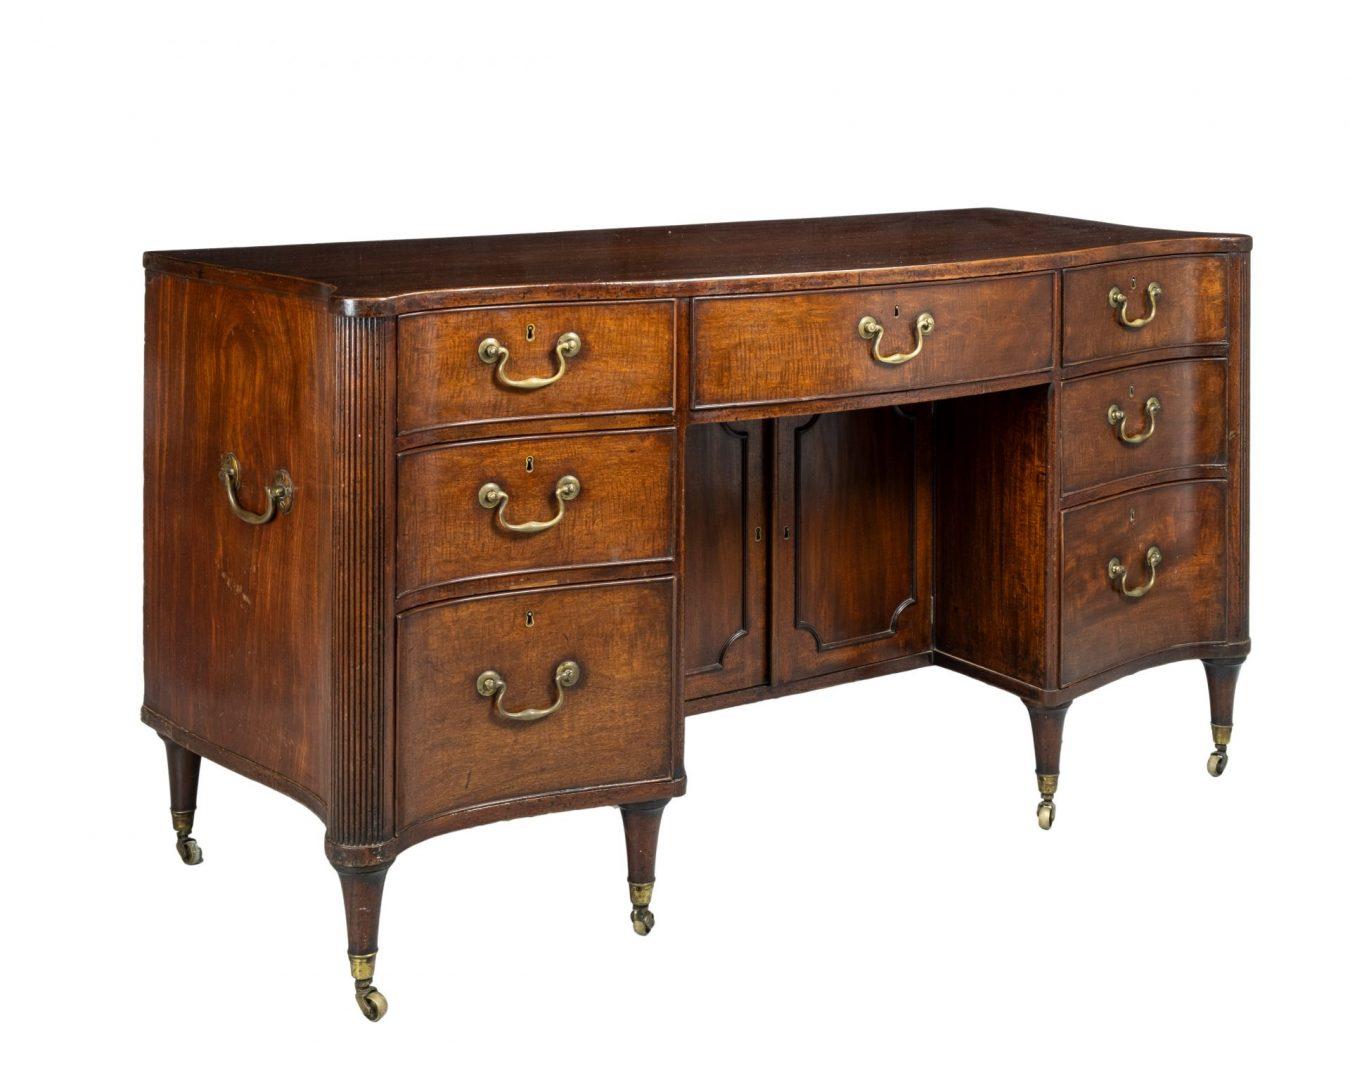 A large late 18th century Hepplewhite figured Mahogany serpentine kneehole desk with shaped square edge top above two banks of three graduated drawers, large fitted centre drawer above a kneehole and a panelled cupboard beneath; reeded side columns,